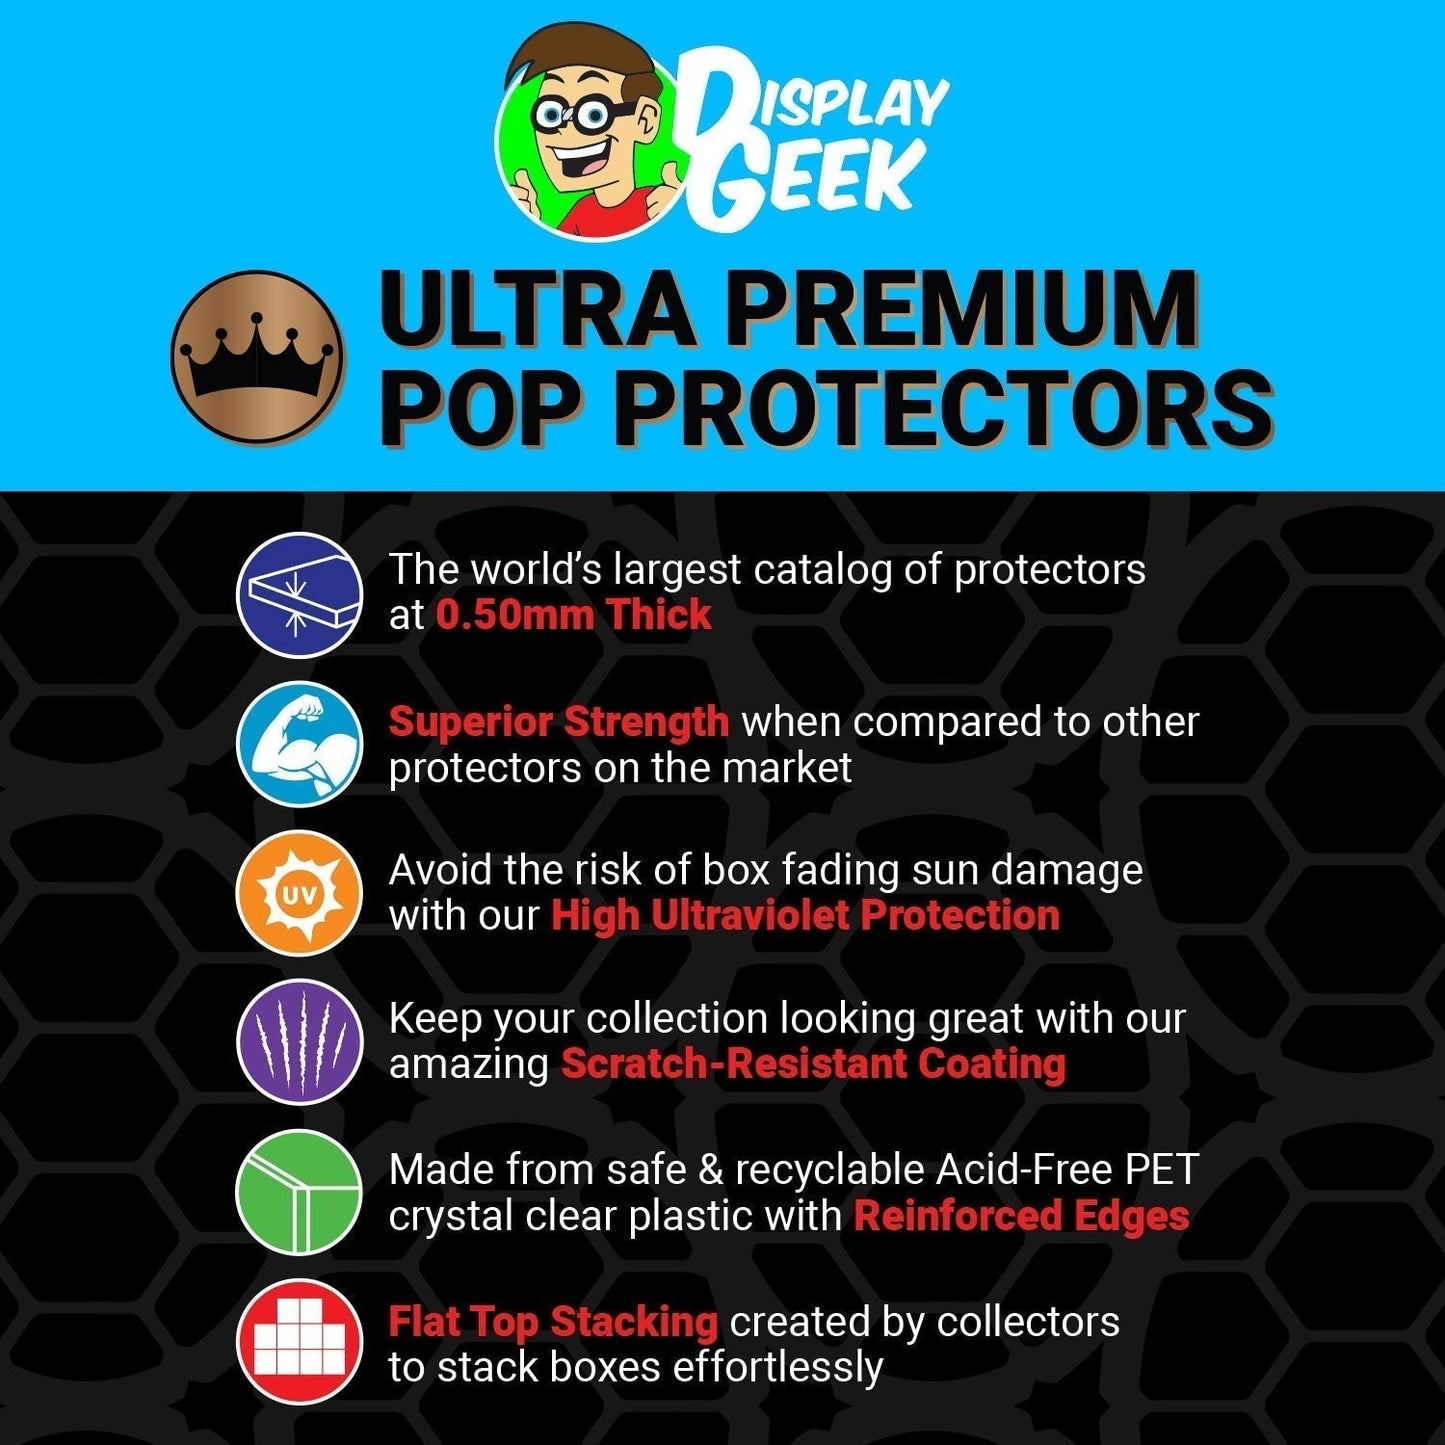 Pop Protector for Darth Vader #02 Funko Pop Die-Cast Outer Box - PPG Pop Protector Guide Search Created by Display Geek